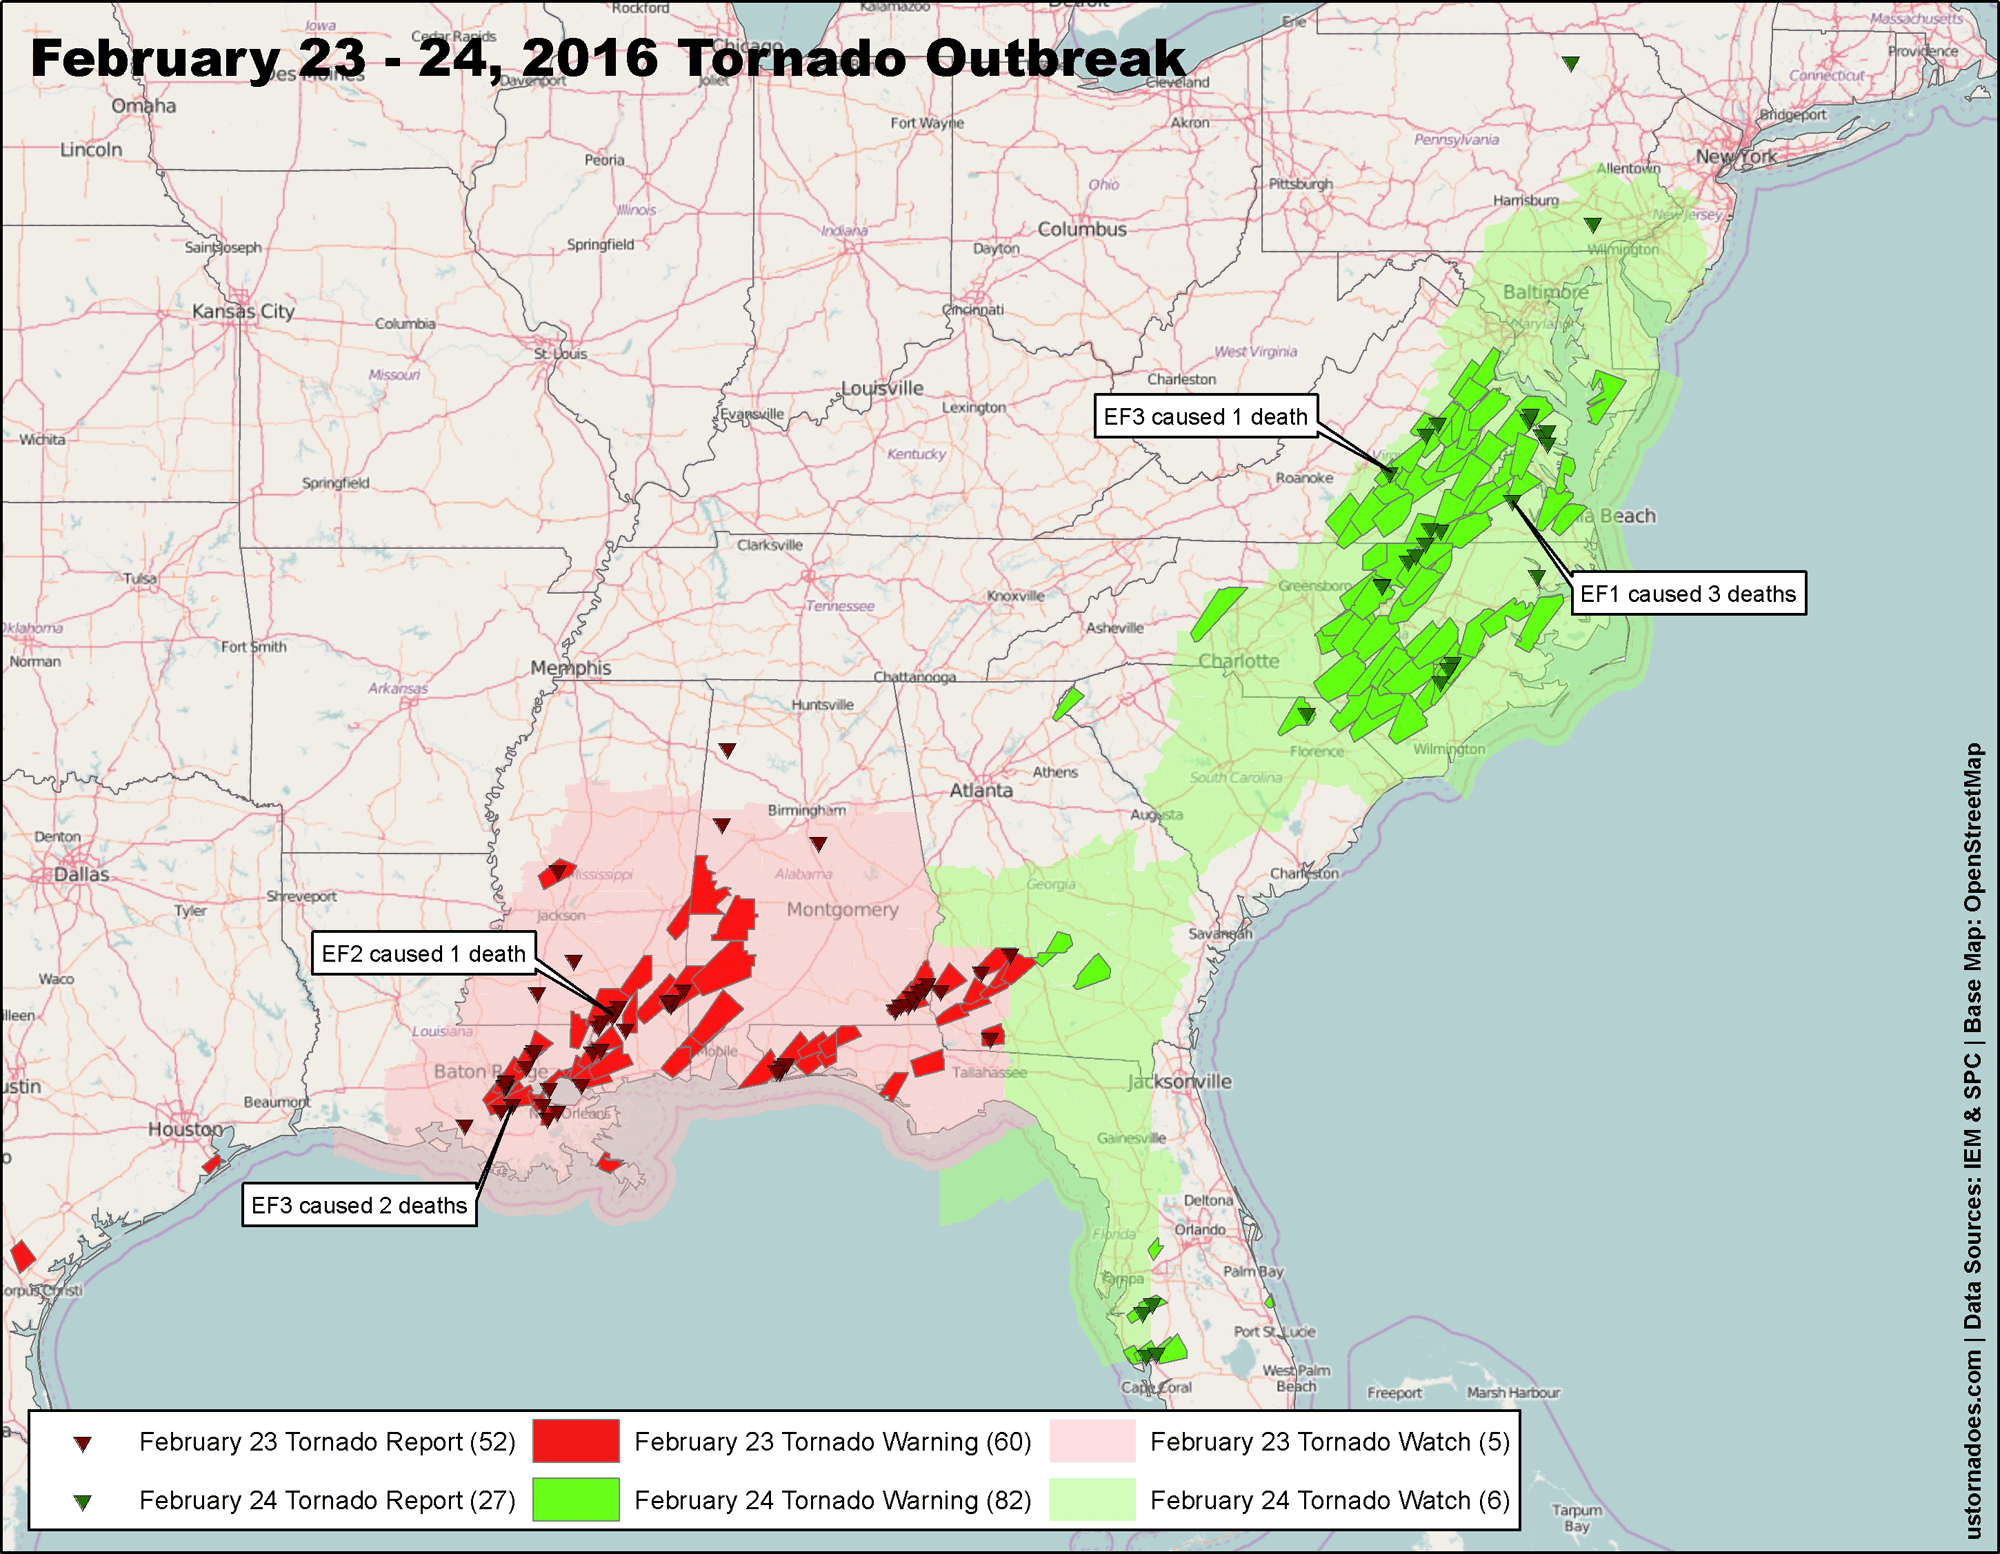 The largest tornado outbreaks of 2016